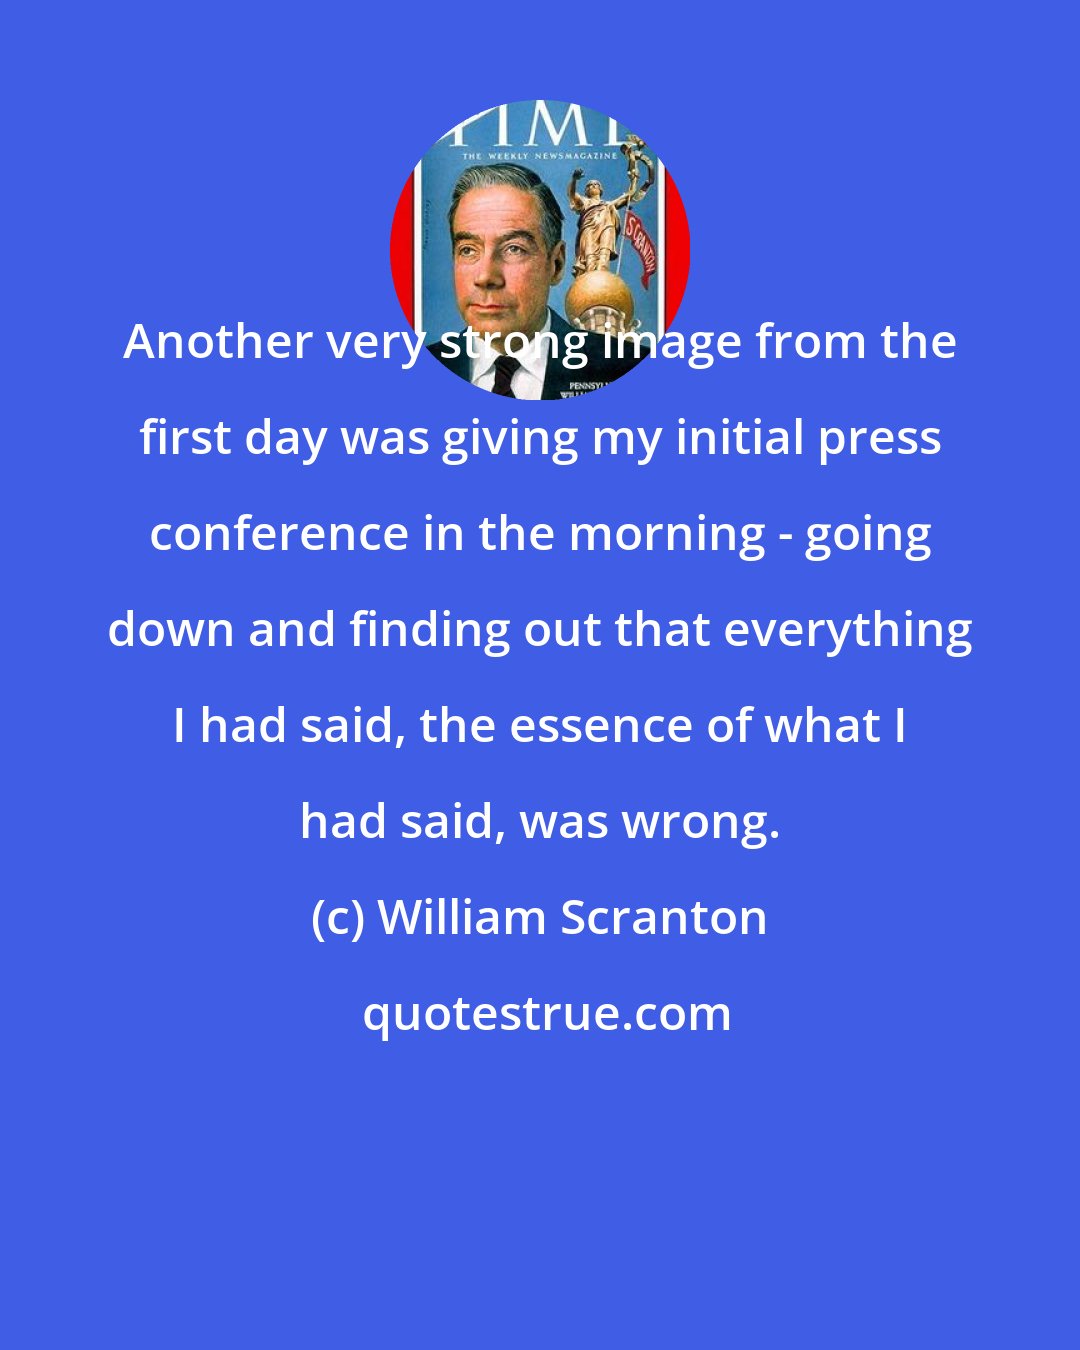 William Scranton: Another very strong image from the first day was giving my initial press conference in the morning - going down and finding out that everything I had said, the essence of what I had said, was wrong.